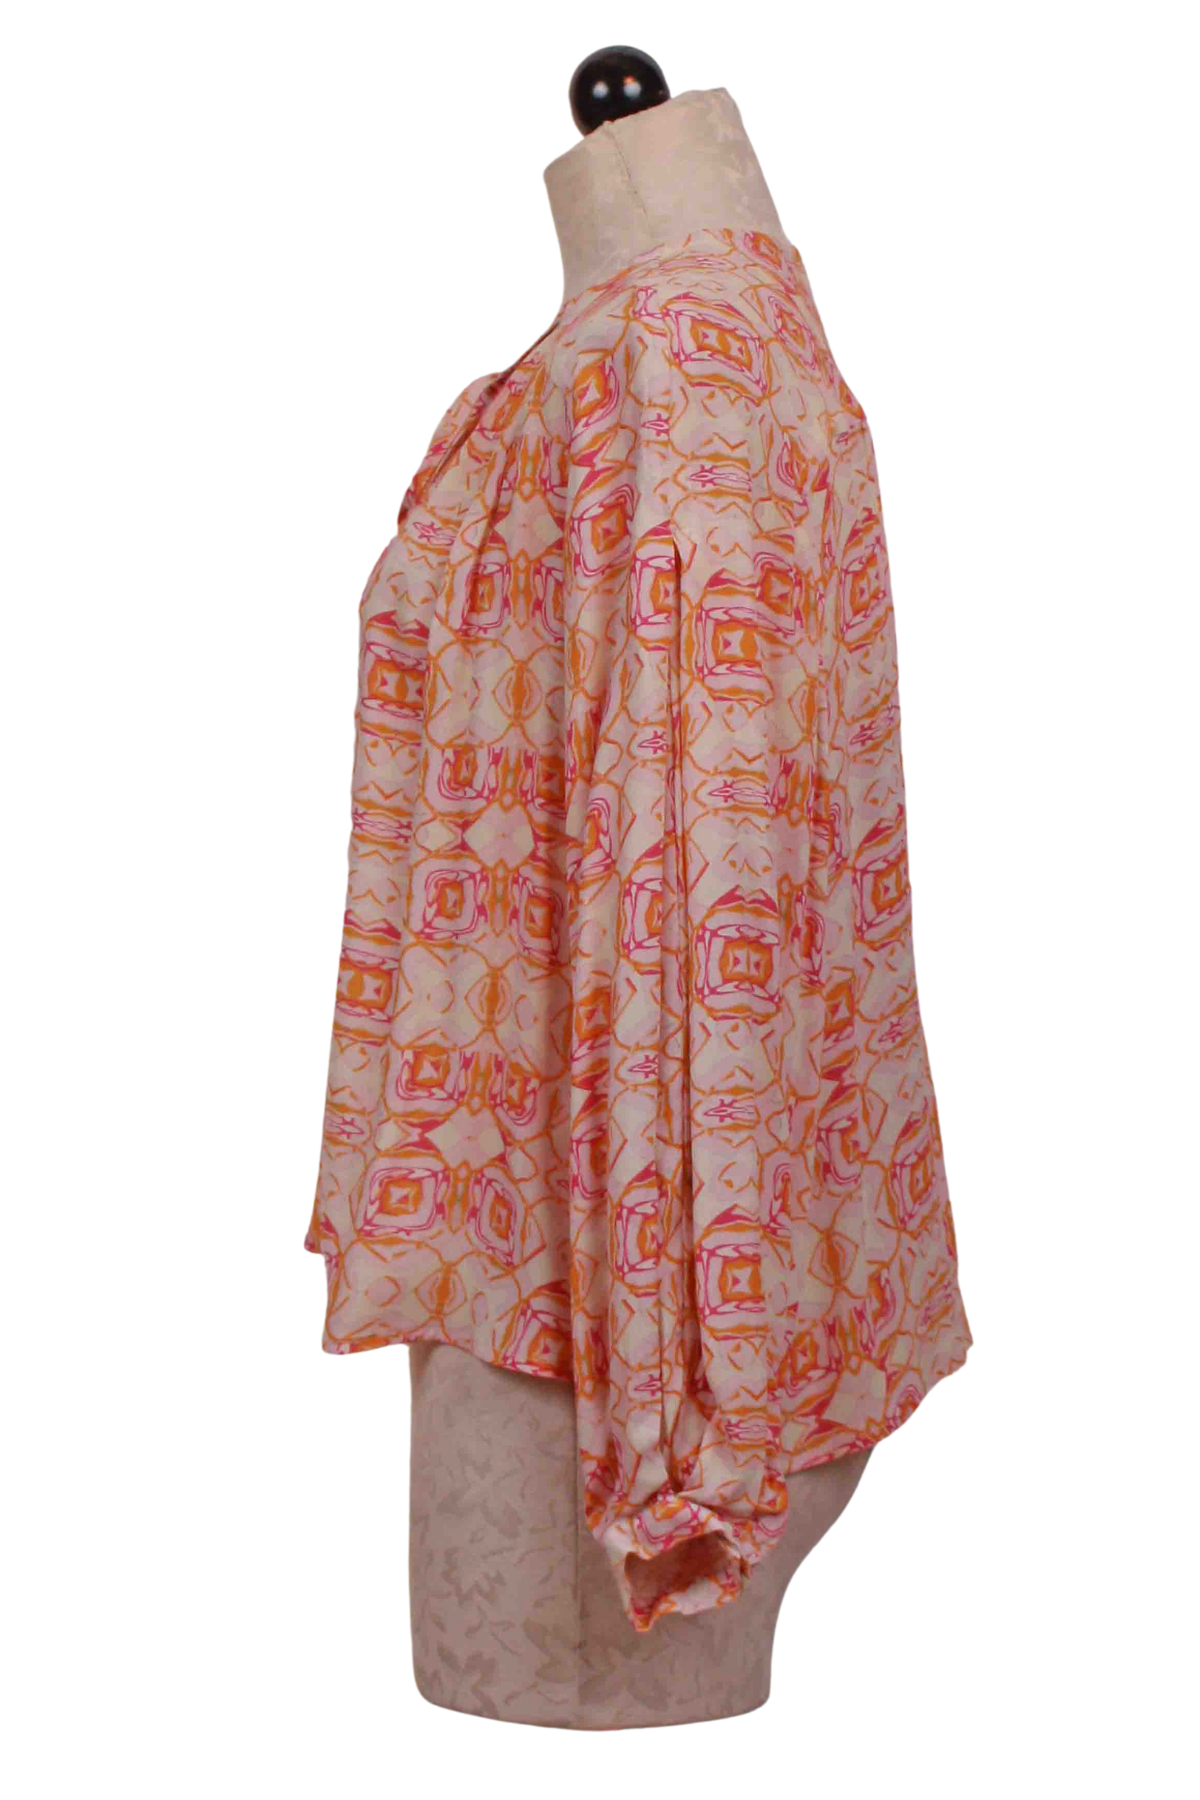 side view of Off White and Pink Soft Pastel Kaleidoscope Print Blouson Sleeve Blouse by See You Soon